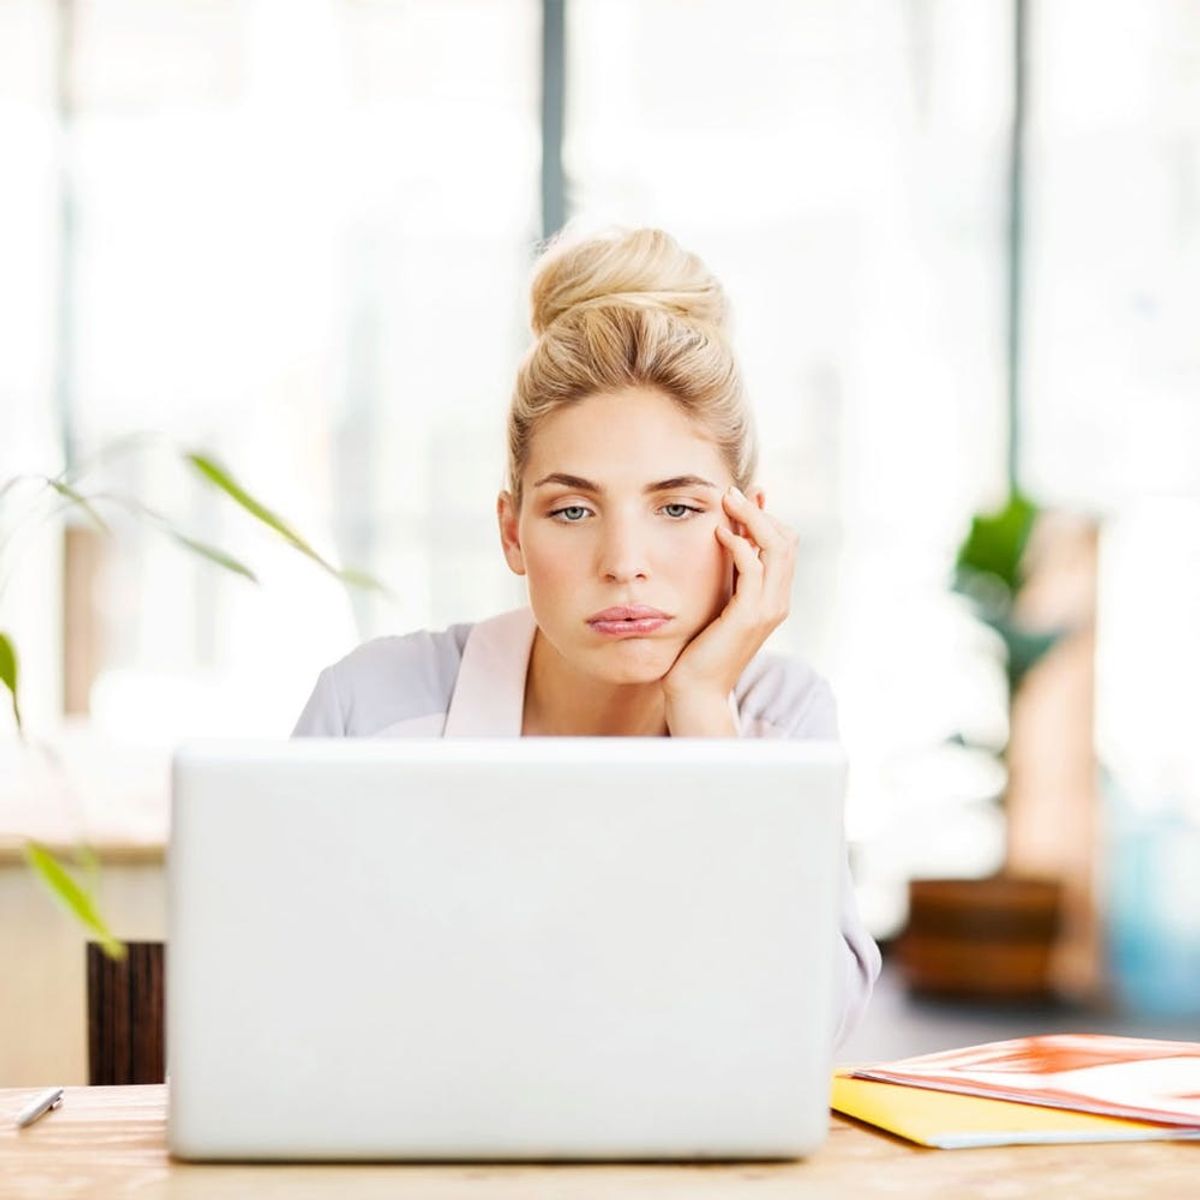 How to Tell If You’re Bored or Just Plain Unhappy at Work